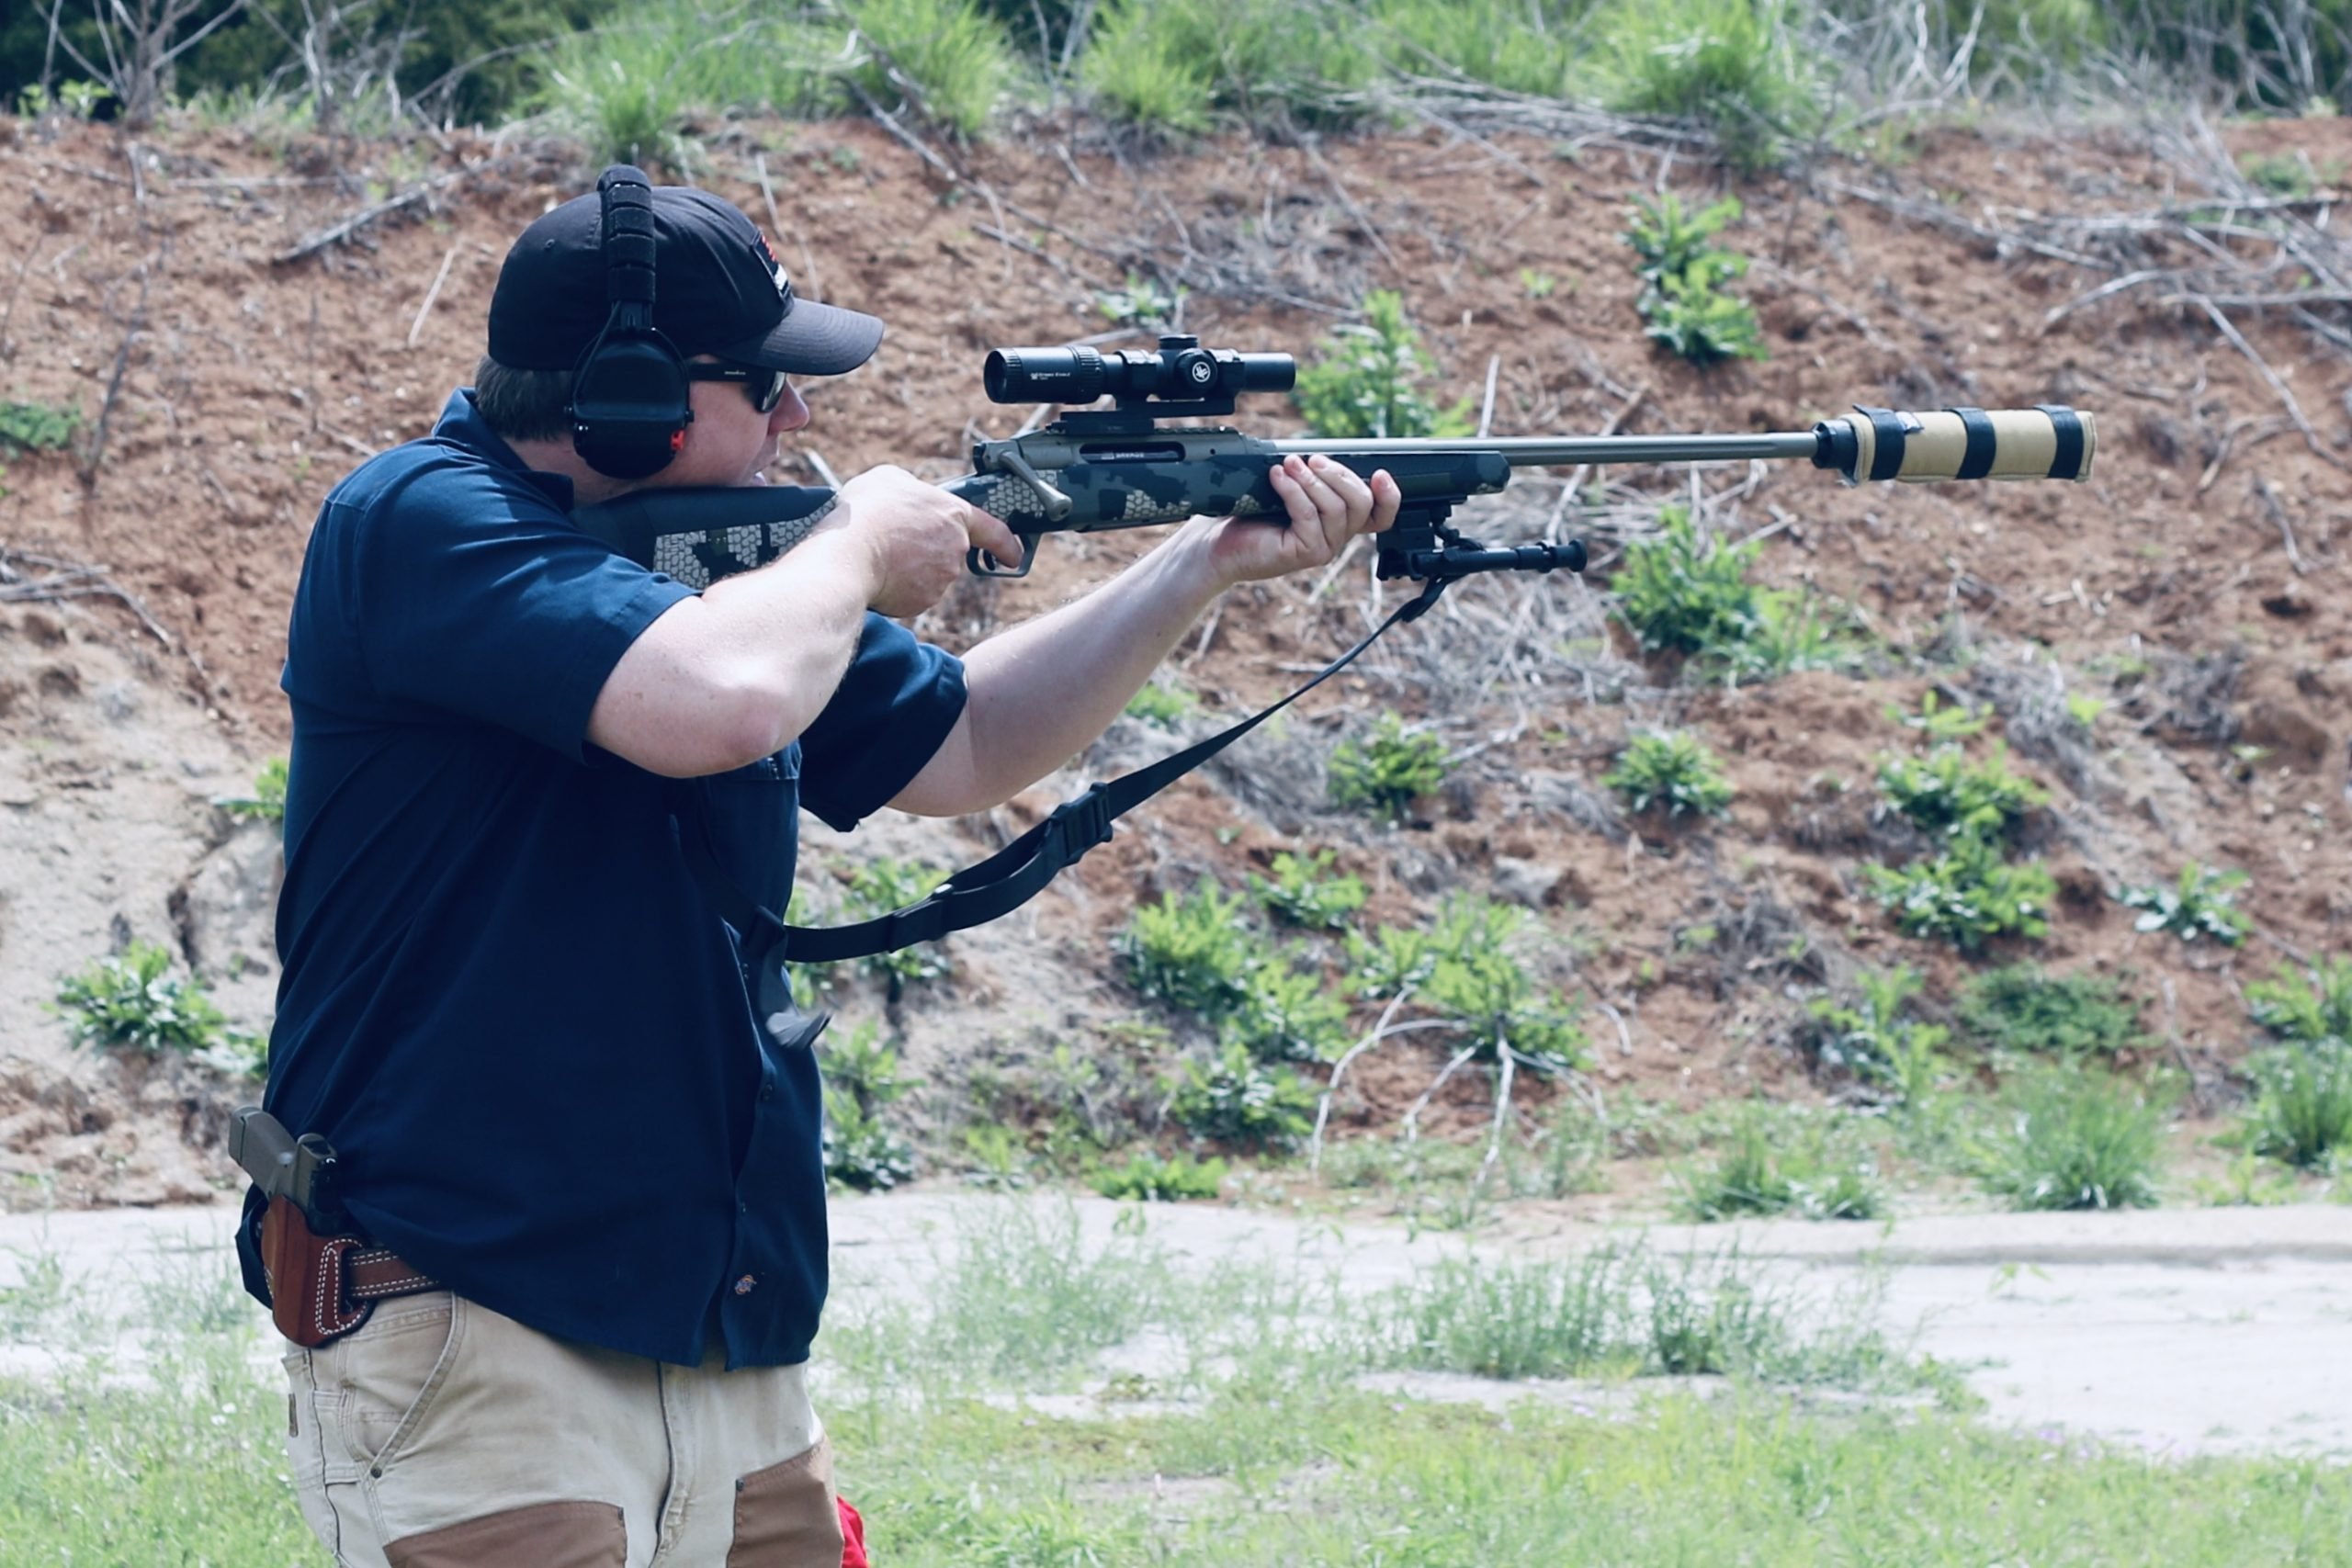 David Higginbotham running a Savage Impulse straight pull rifle in a Ranier Arms Practical Rifle Class